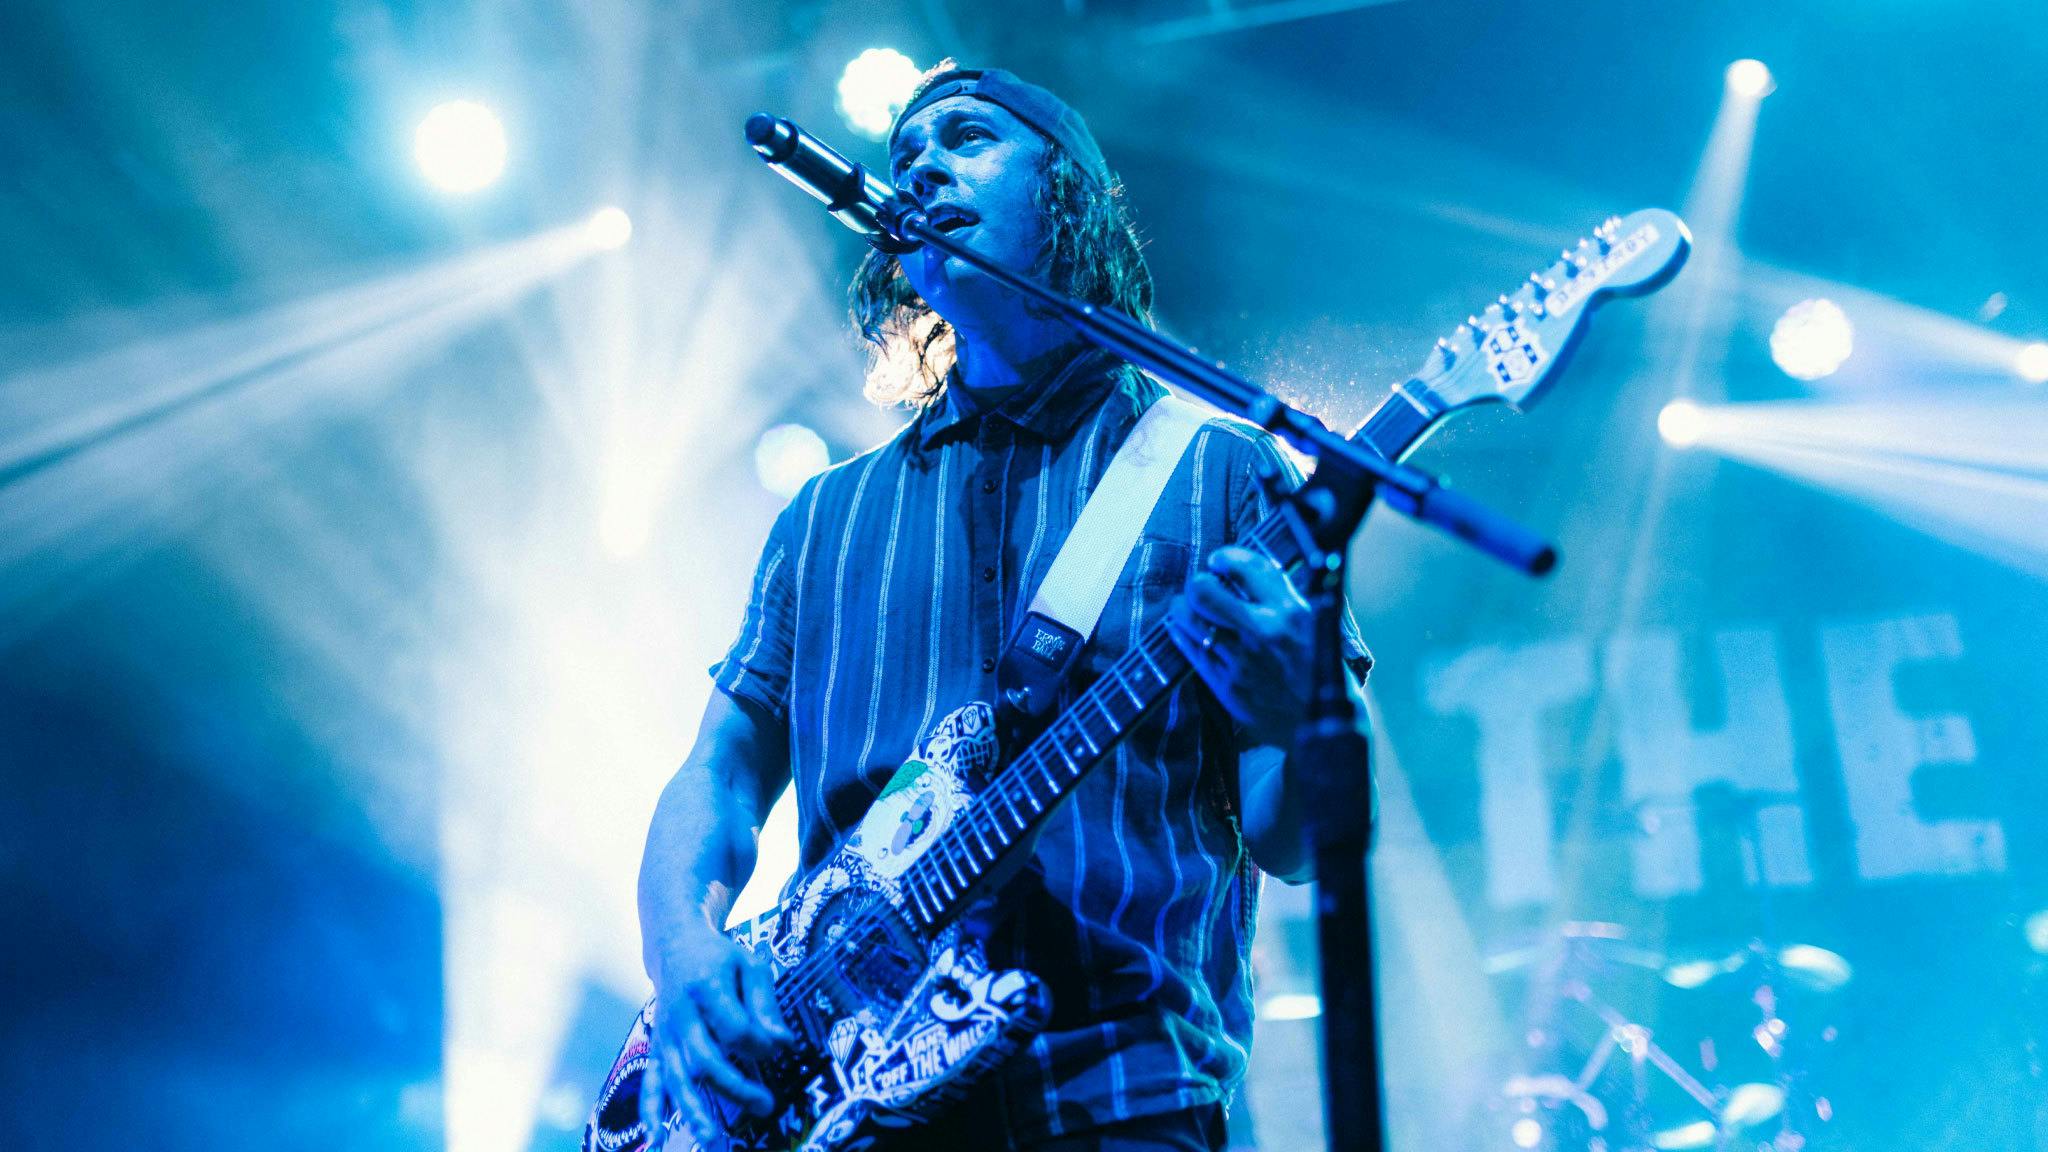 In pictures: Pierce The Veil’s long-awaited return to London